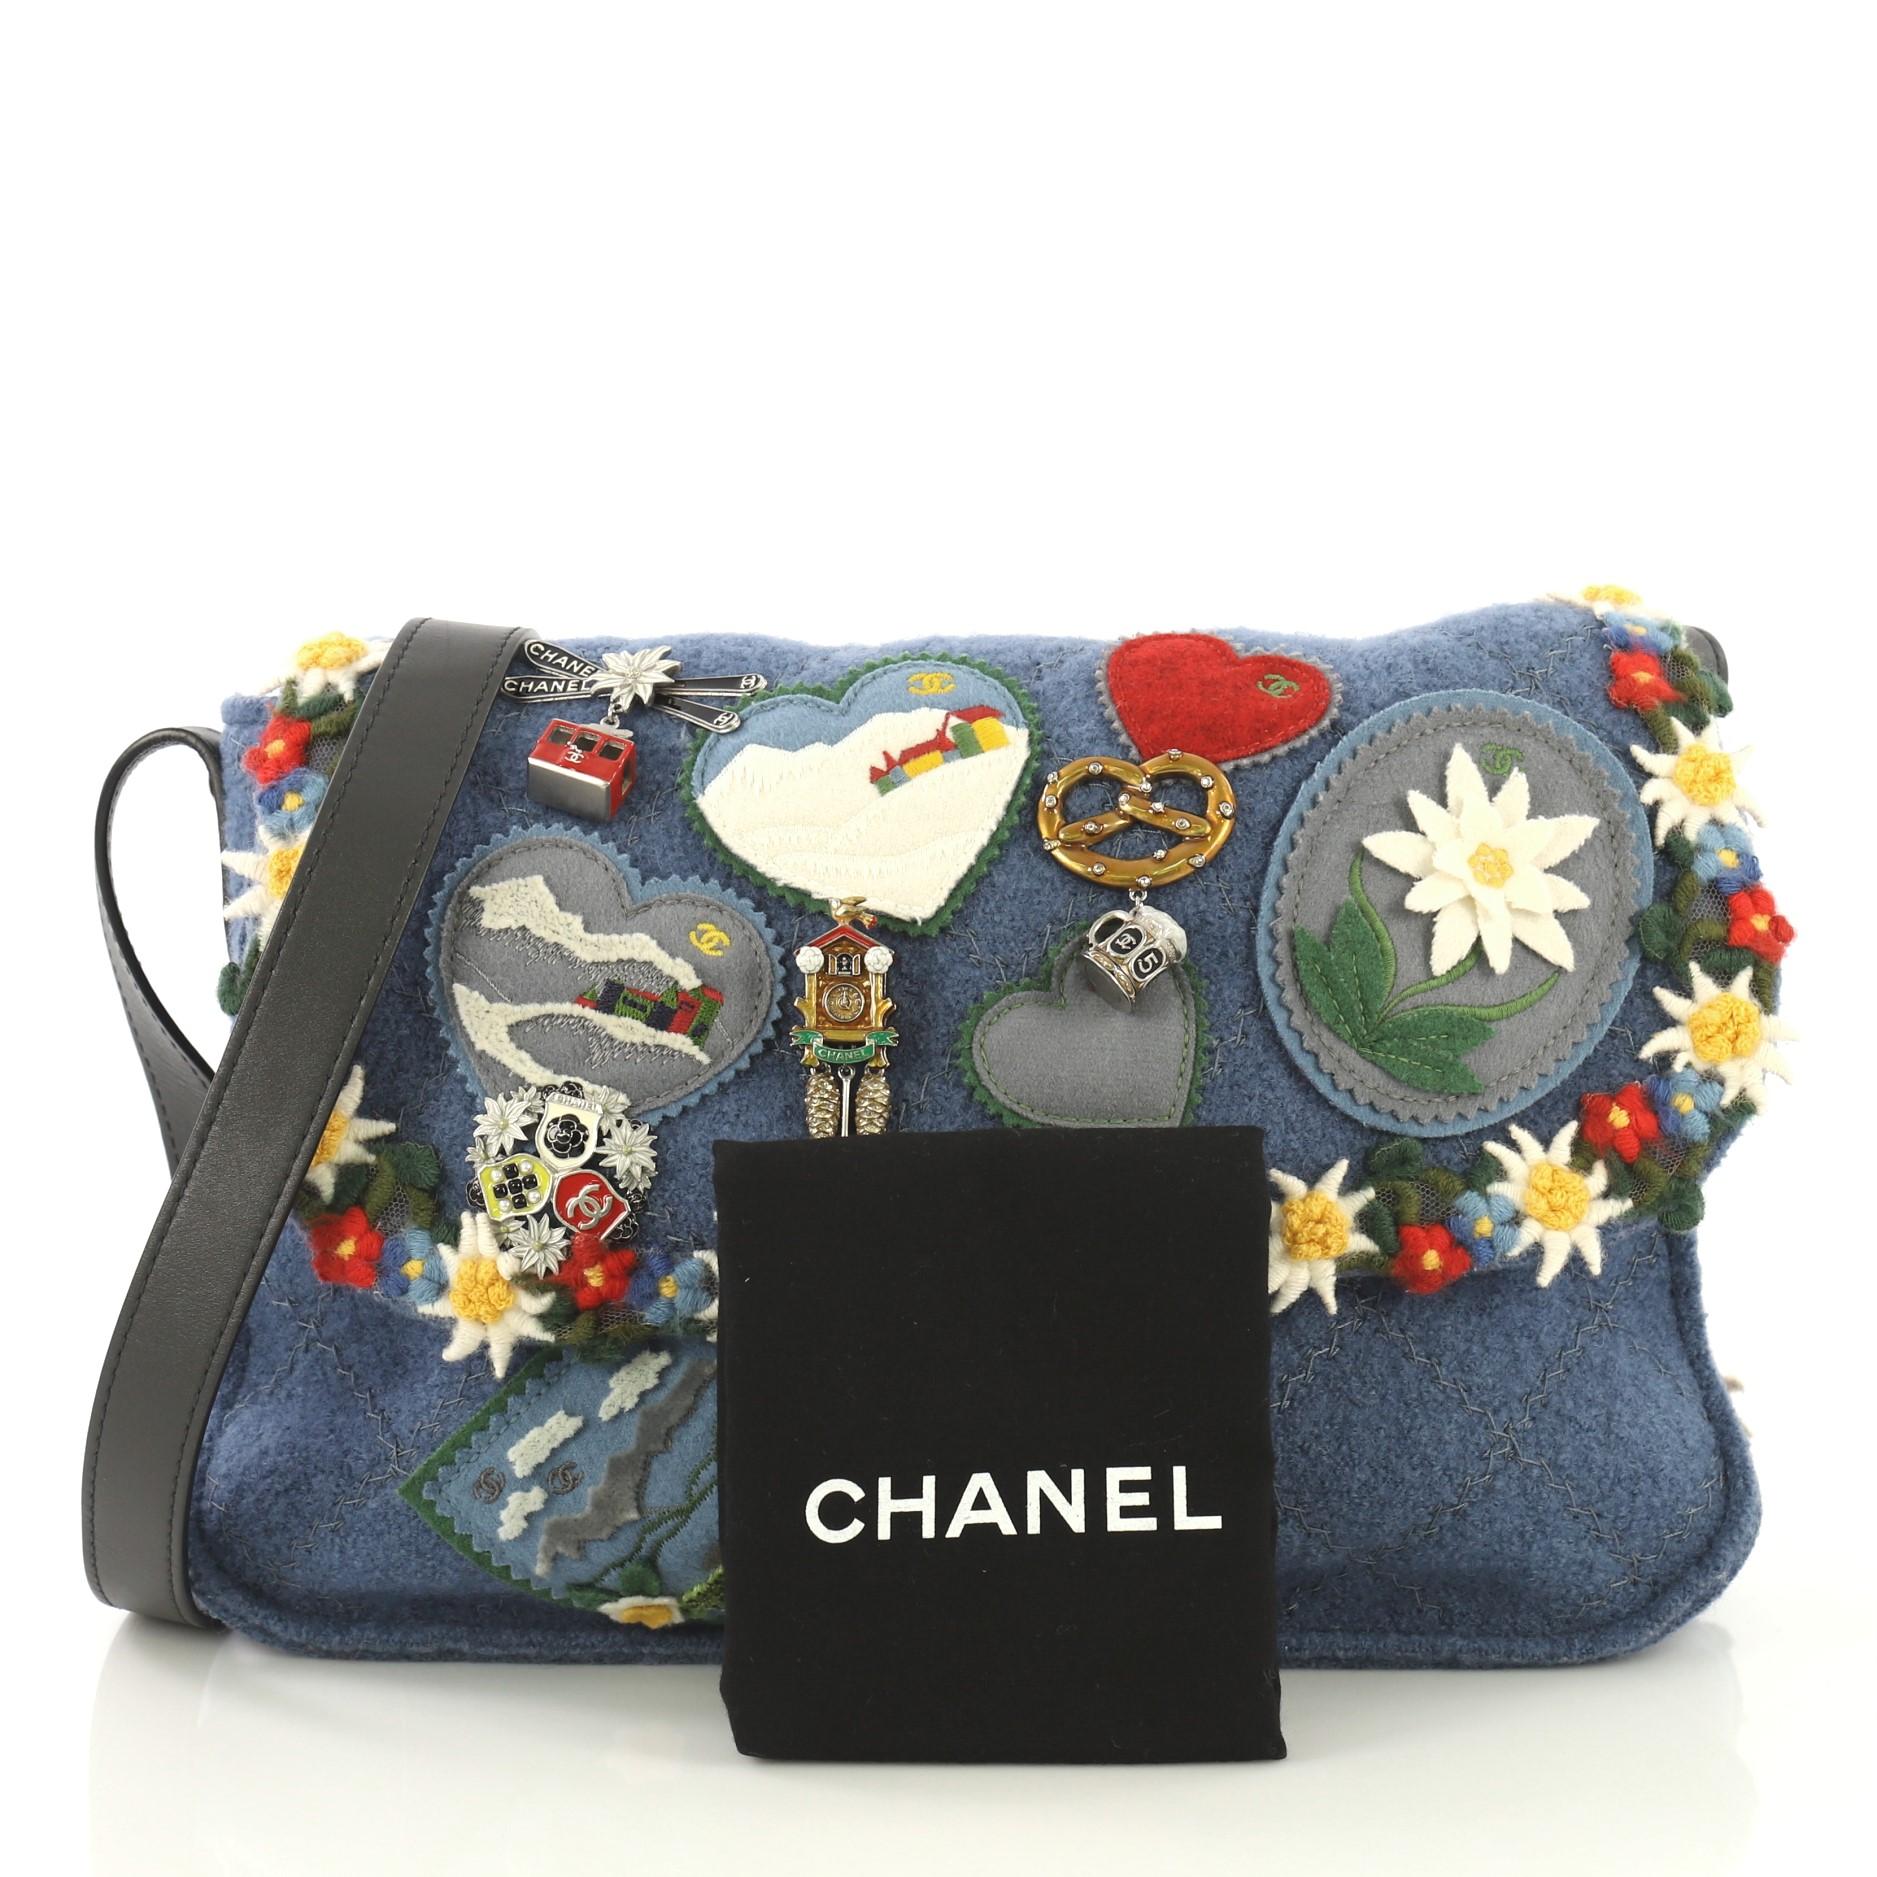 This Chanel Paris-Salzburg Crest Austrian Messenger Embroidered Felt Small, crafted from blue embroidered felt, features adjustable leather strap, patches and metal charms, and aged silver-tone hardware. Its flap opens to a gray fabric interior with